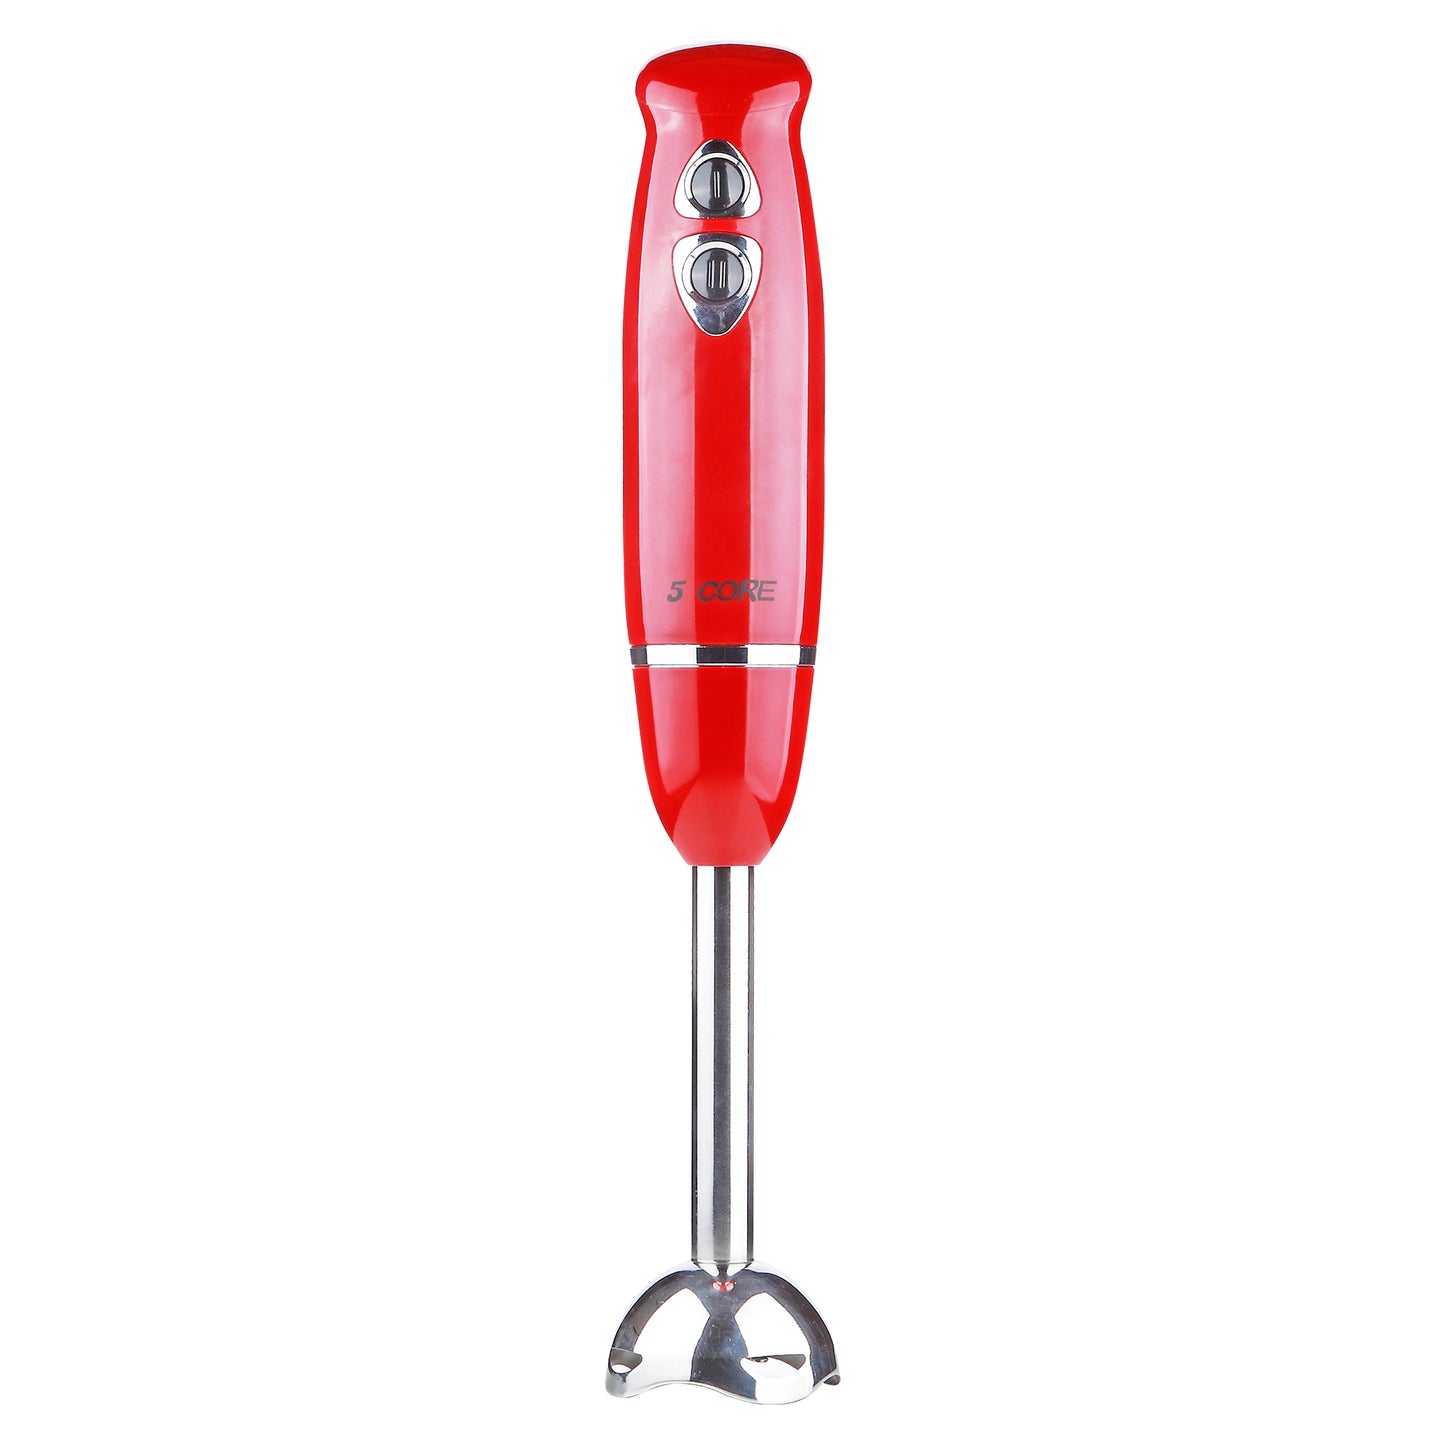 Powerful Immersion Blender Red| 500 Watt Multi-Purpose Hand Blender Heavy Duty Copper Motor Brushed Stainless Steel| for Soup, Smoothie, Puree, Baby Food, 304 Stainless Steel Blades- HB 1510 RED